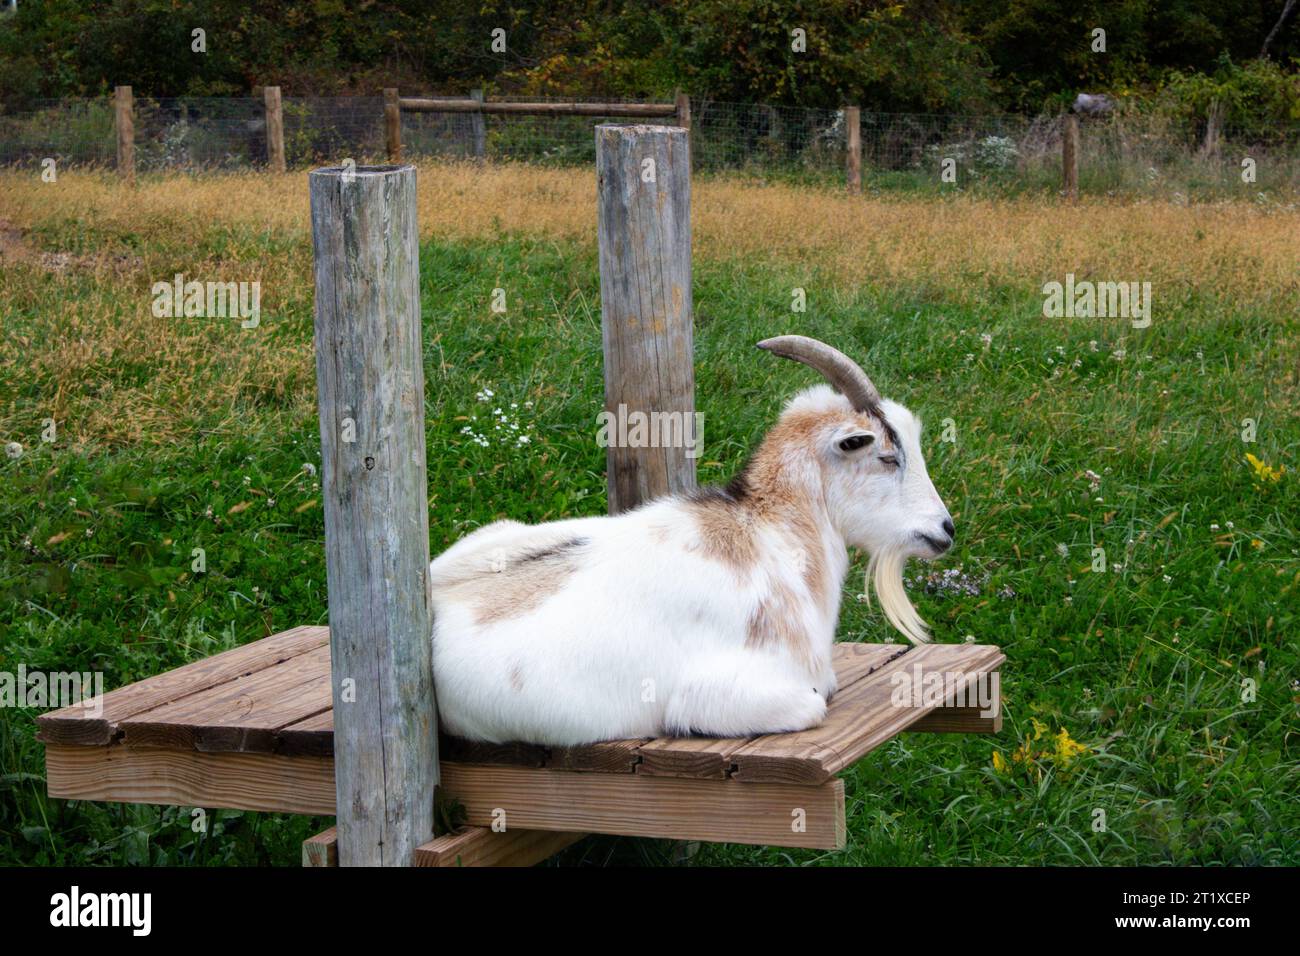 White and brown goat is sitting on a wooden bench in the meadow Stock Photo